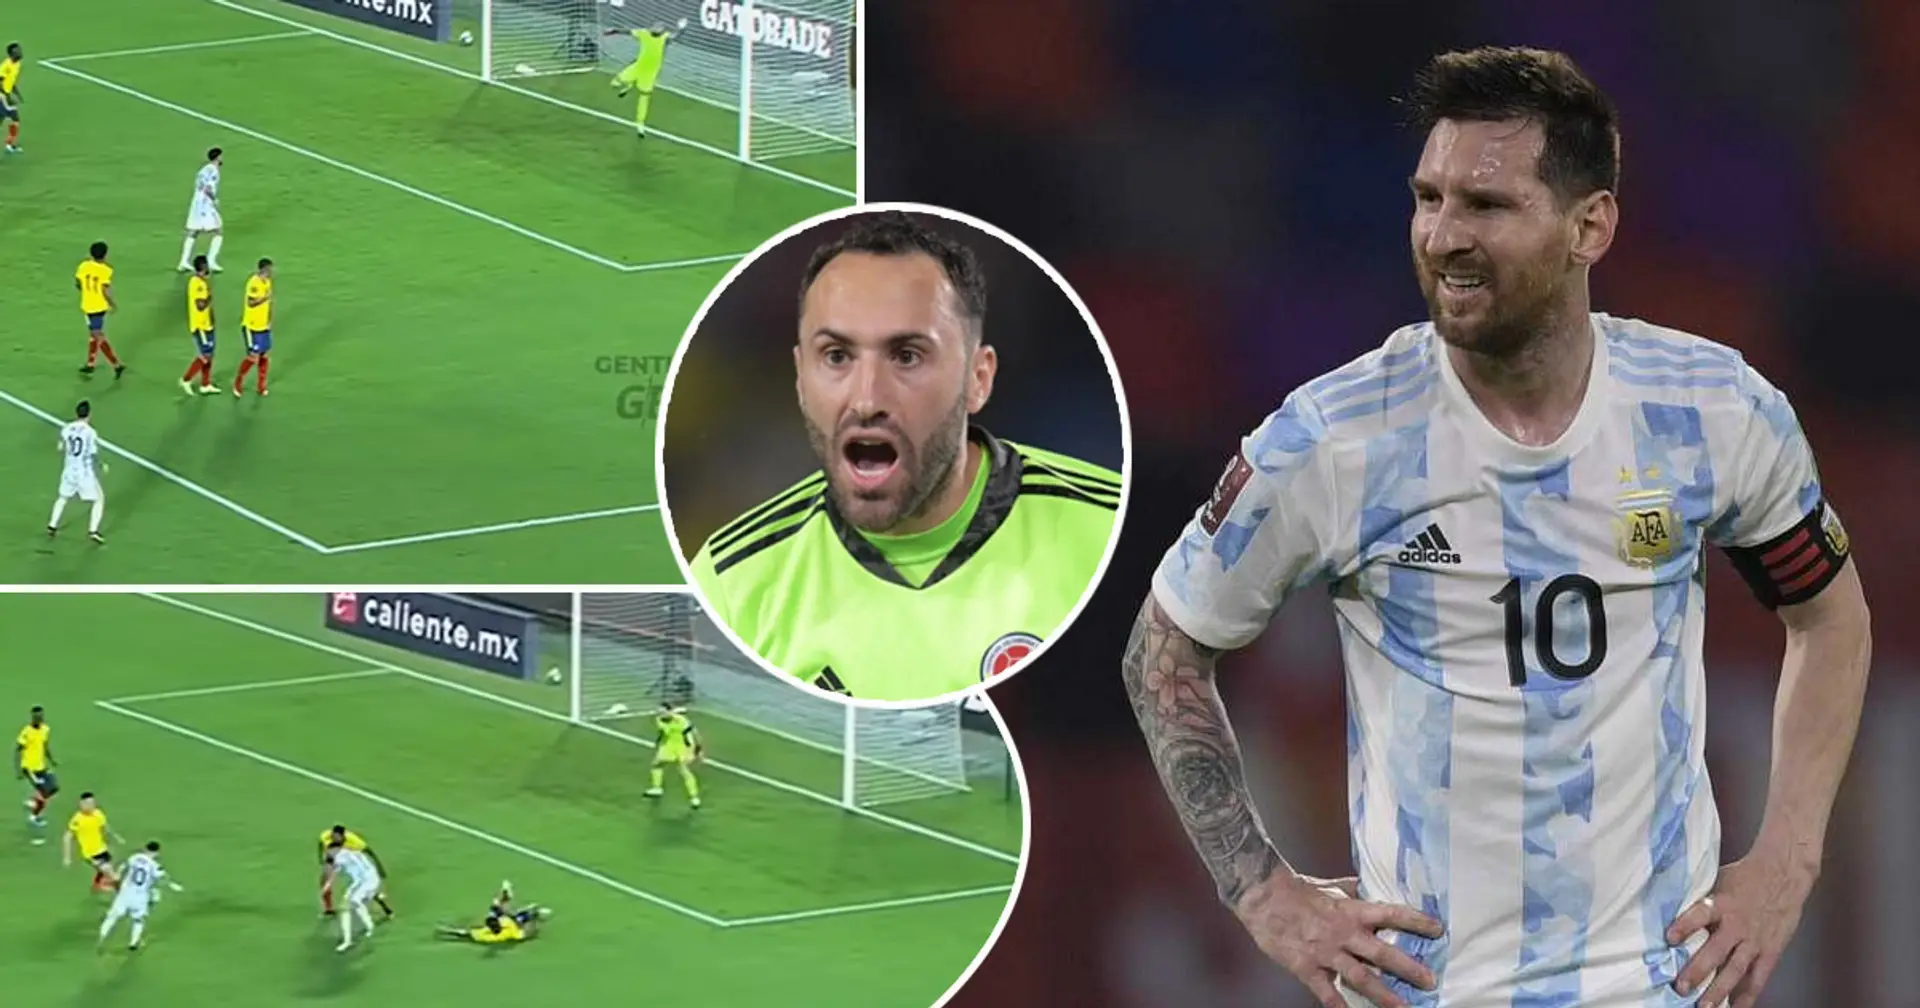 Ospina makes 3 incredible saves to stop Messi from scoring as Colombia draw Argentina in World Cup qualifier